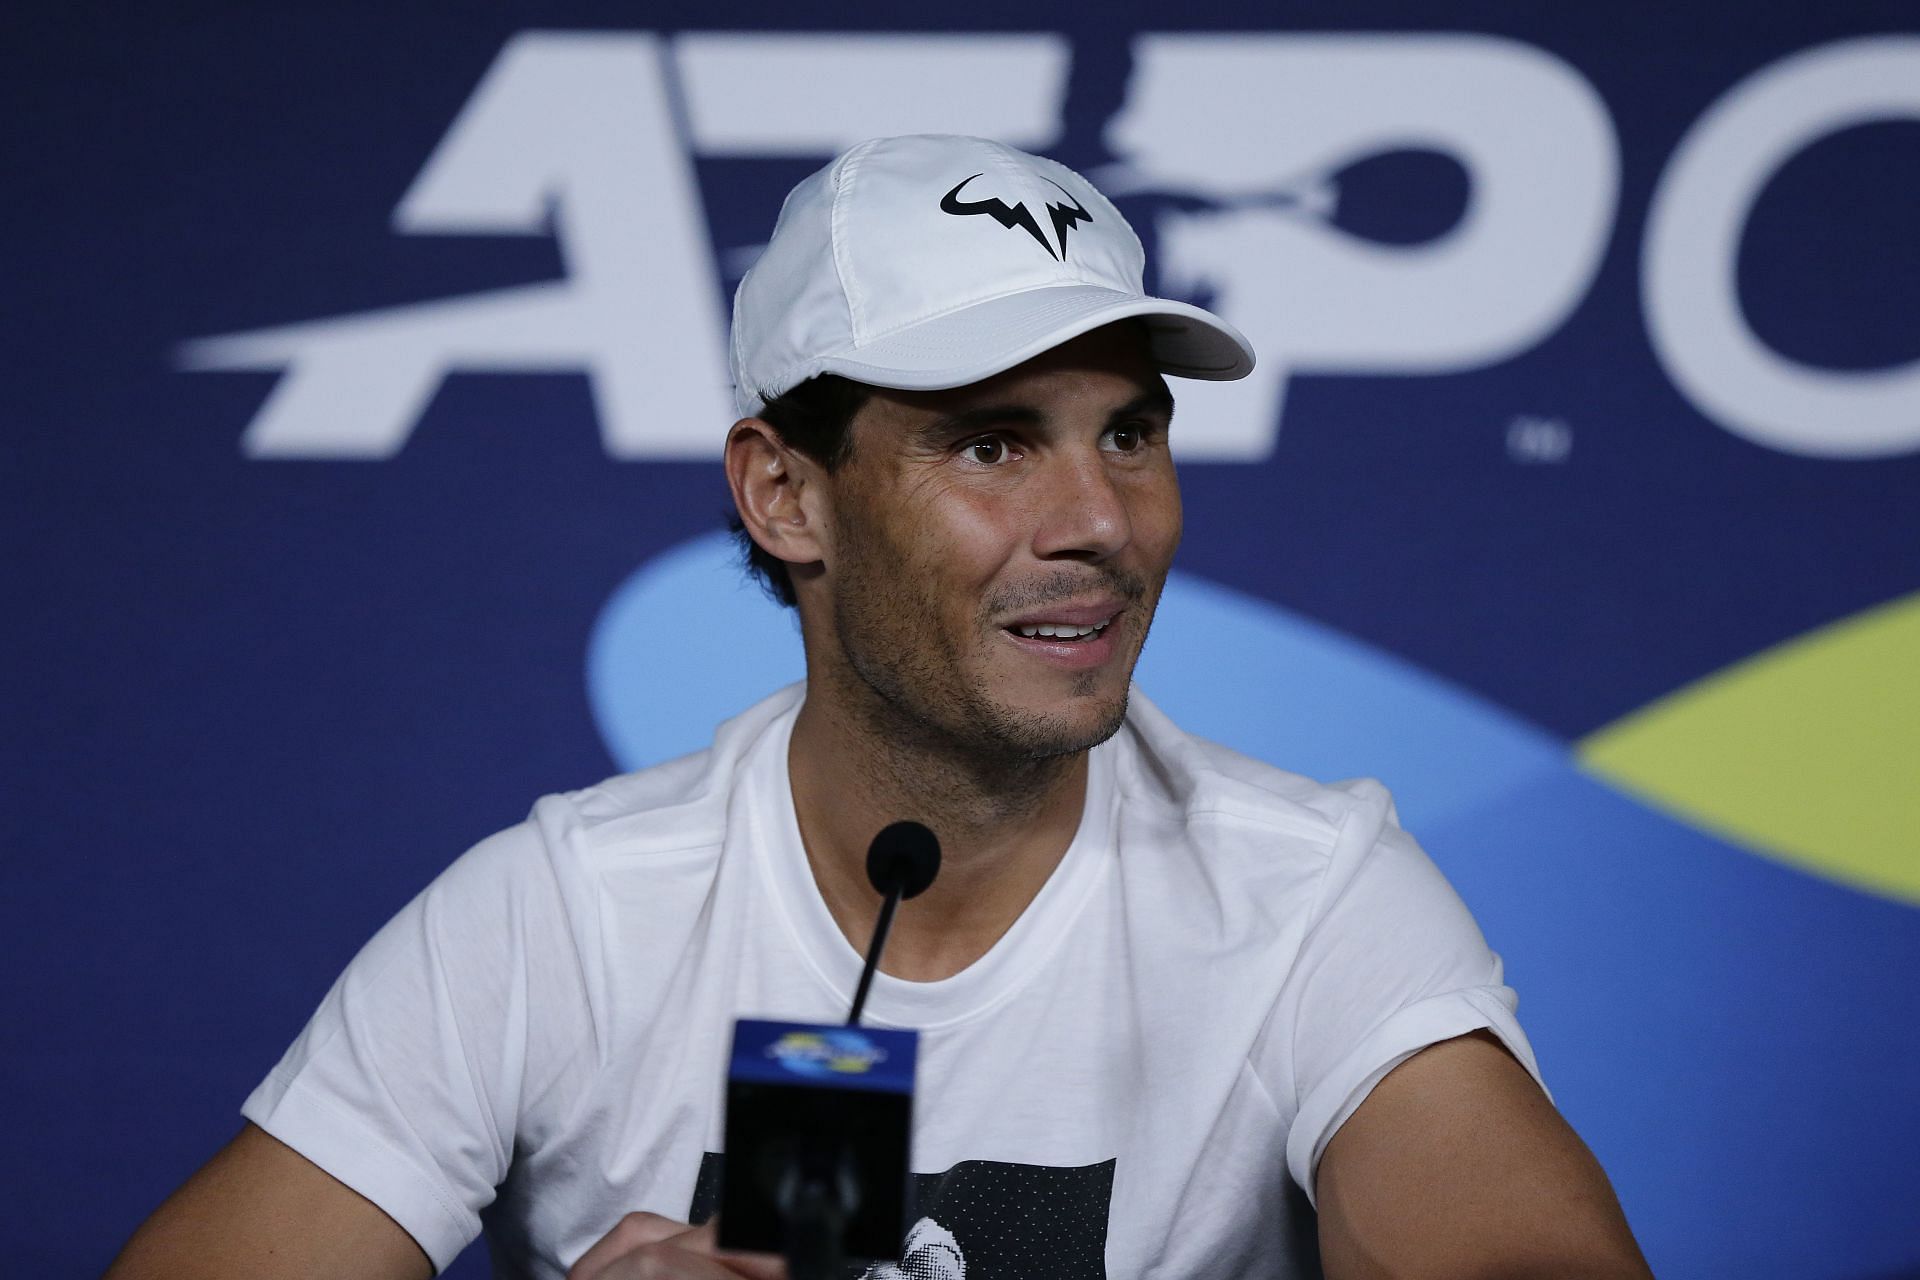 Rafael Nadal could be back in action before the estimated 4-6 weeks time